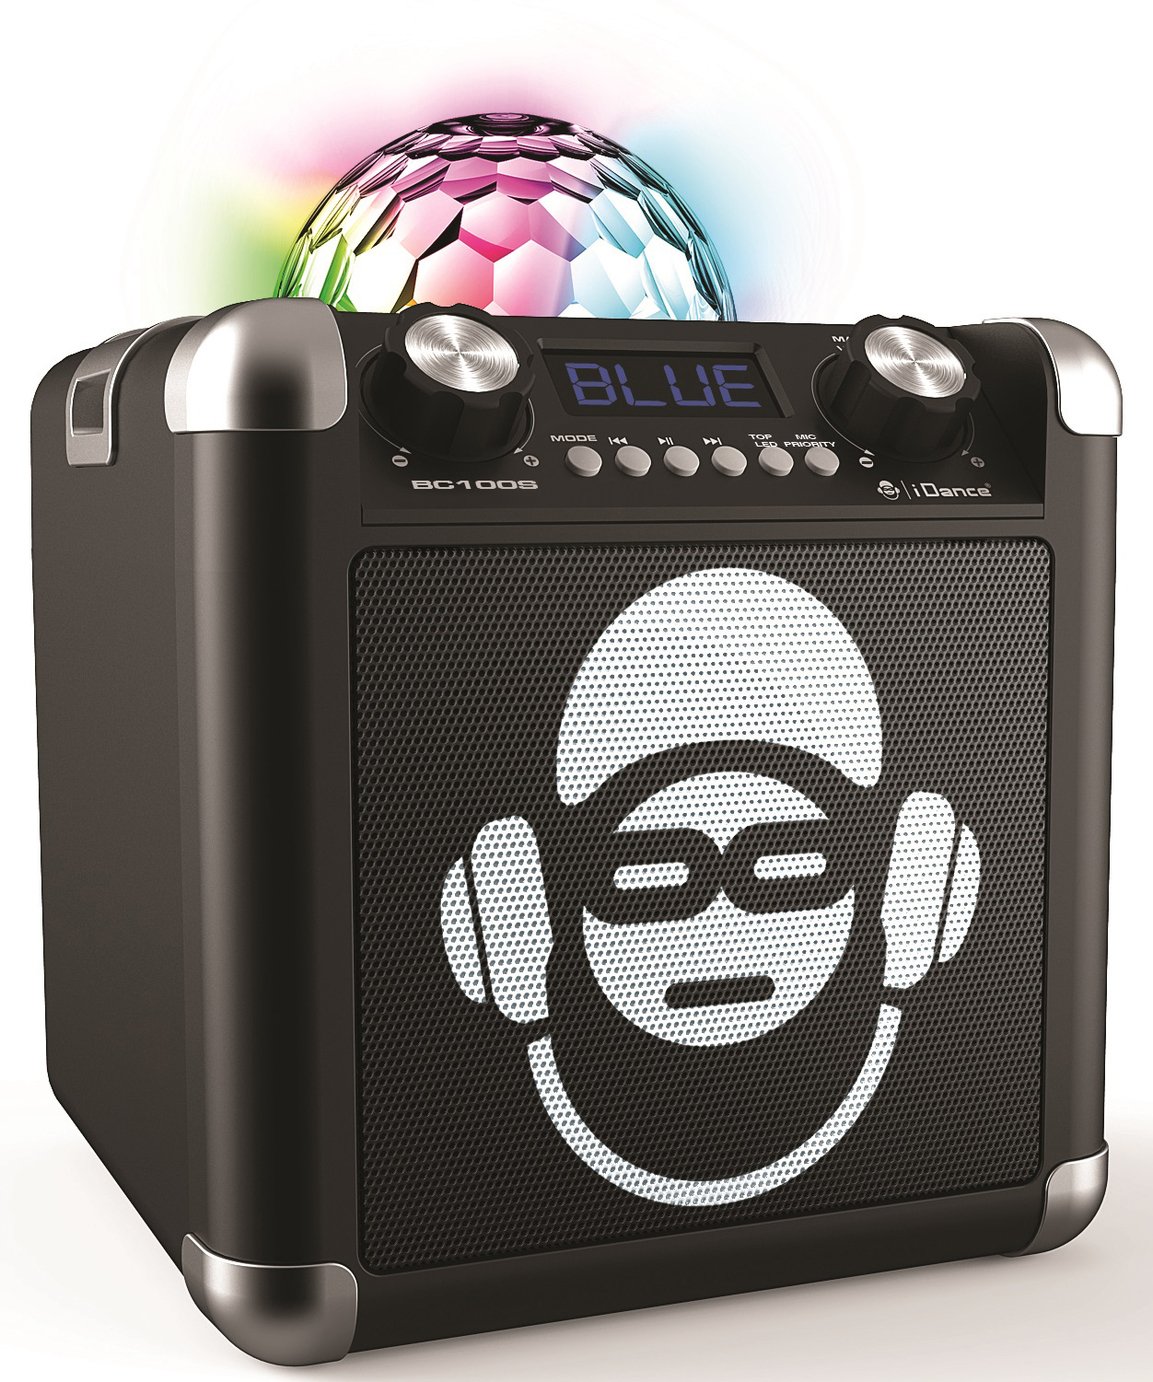 iDance Sing Cube BC100 Bluetooth Karaoke System Review